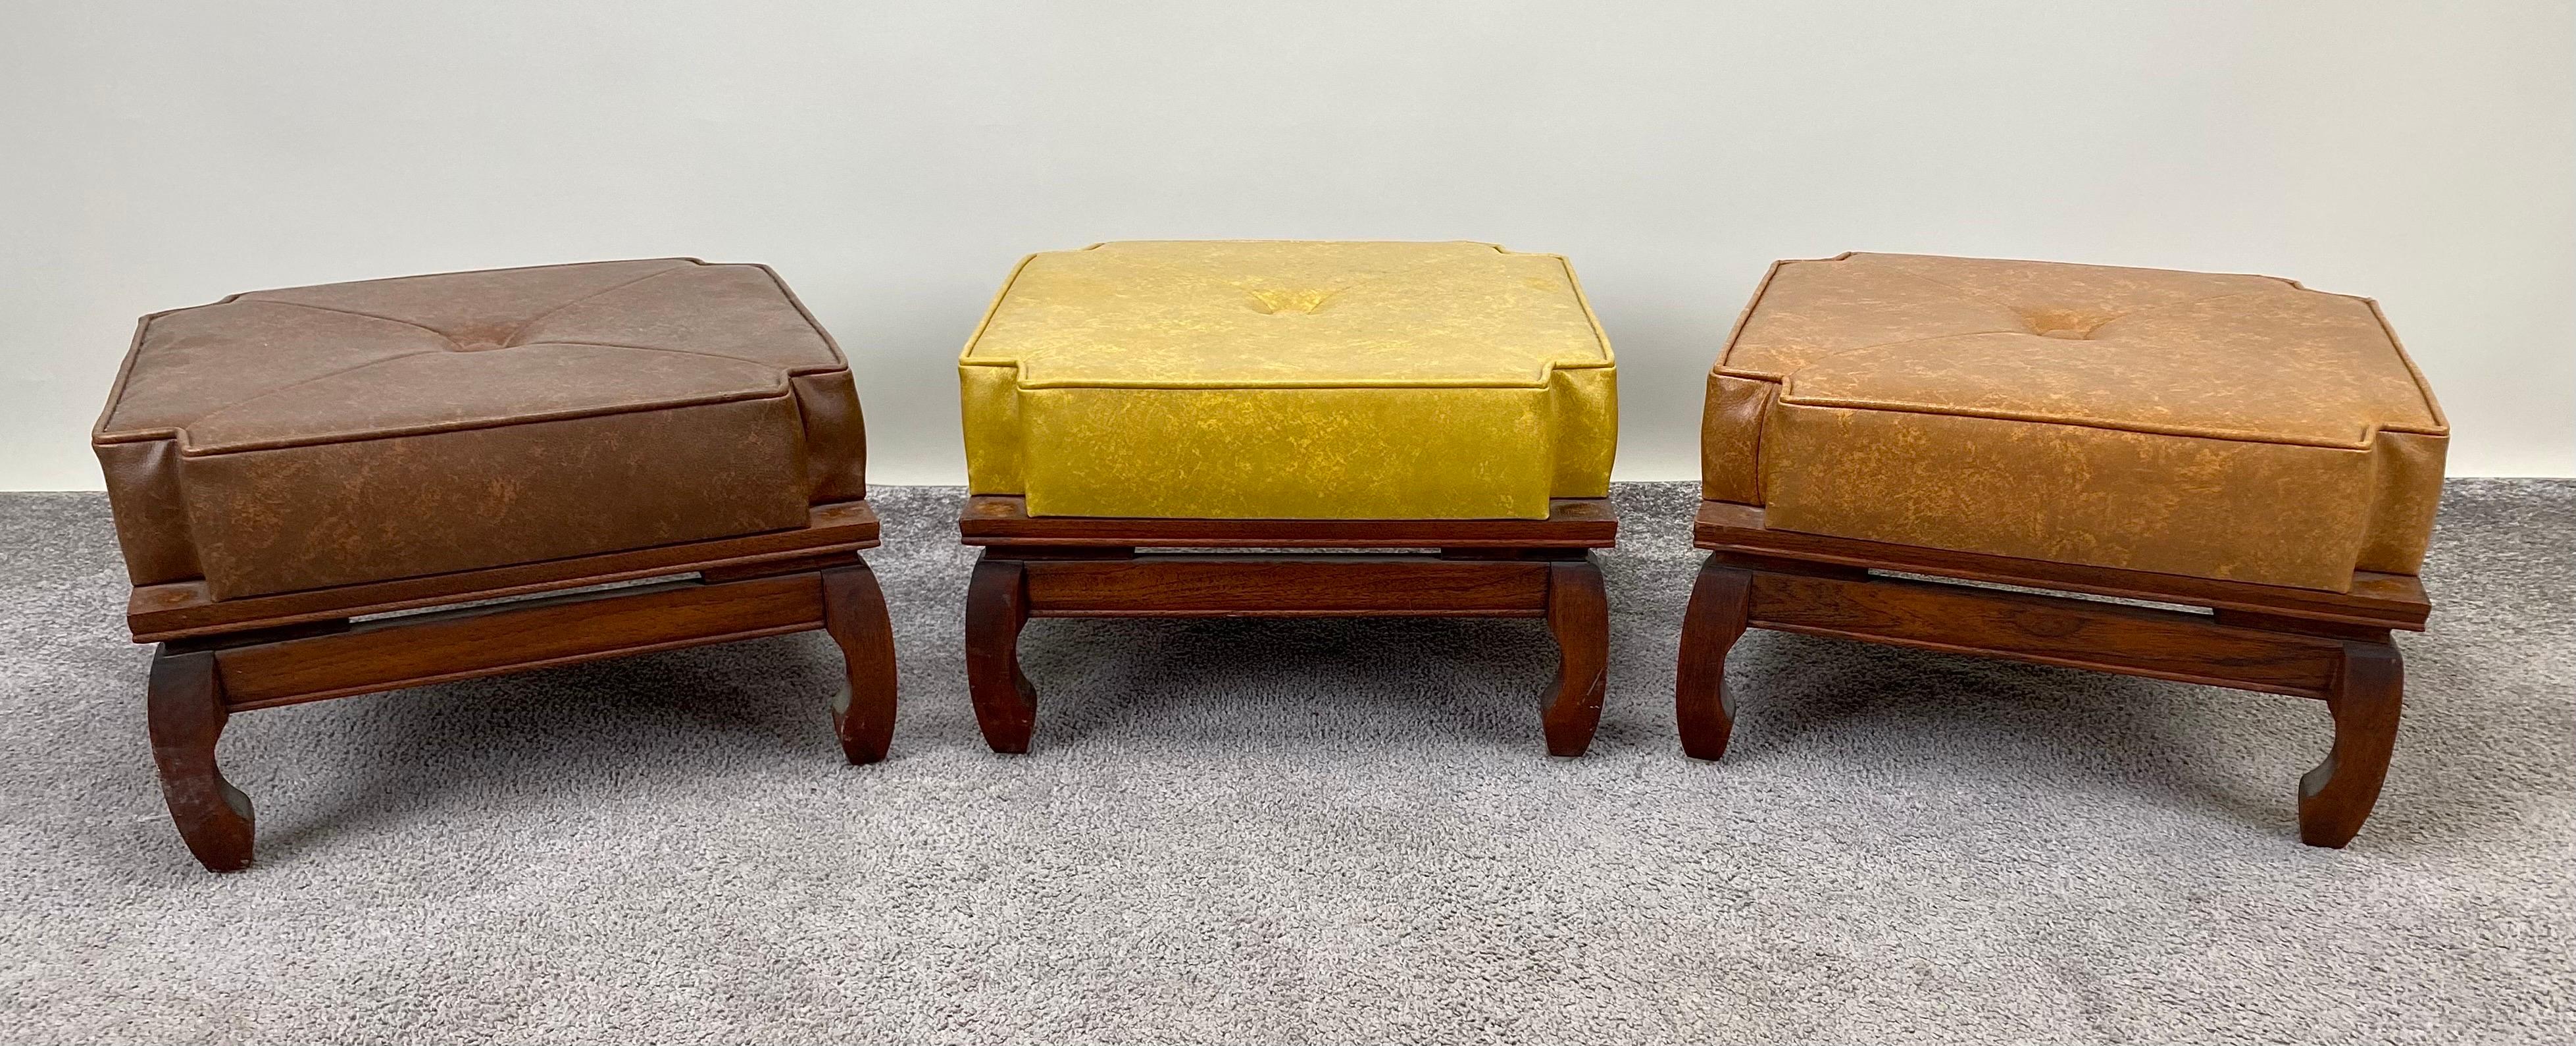 20th Century Mid-Century Modern Leather Nesting Stackable Ottoman Stools, 3 Pcs  For Sale